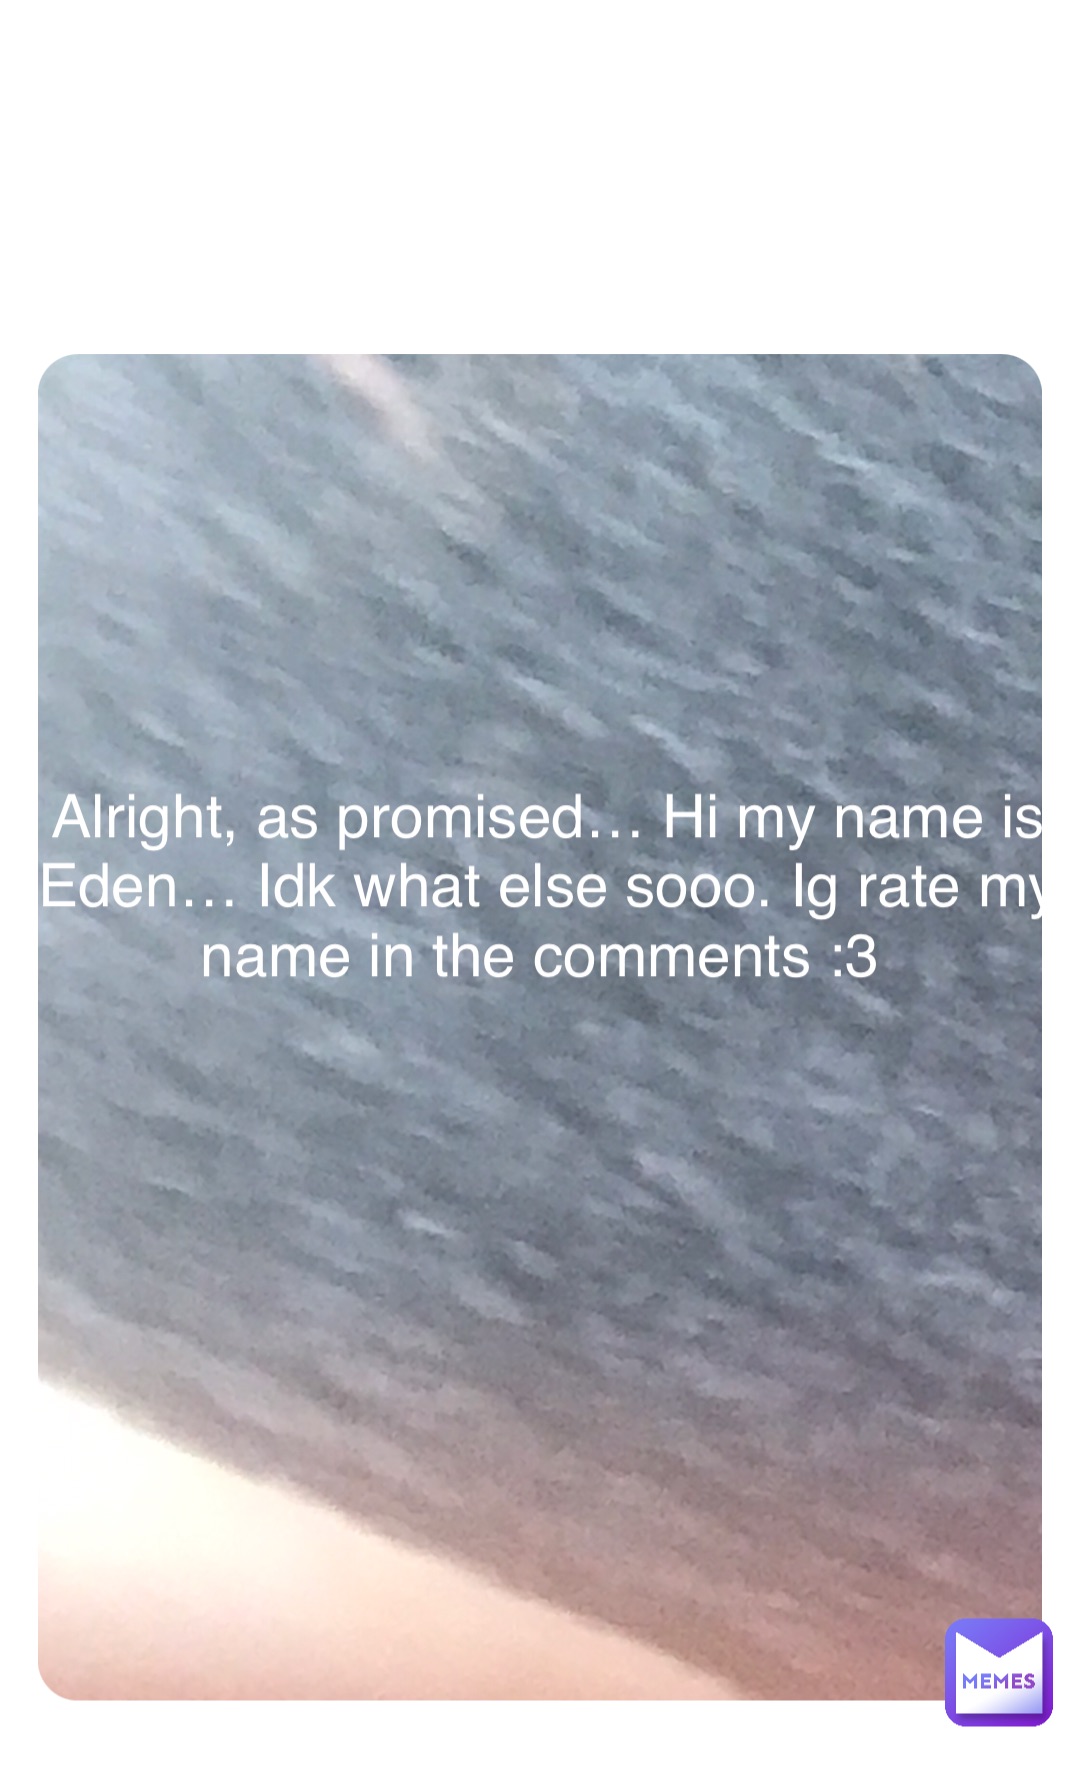 Double tap to edit Alright, as promised… Hi my name is Eden… Idk what else sooo. Ig rate my name in the comments :3